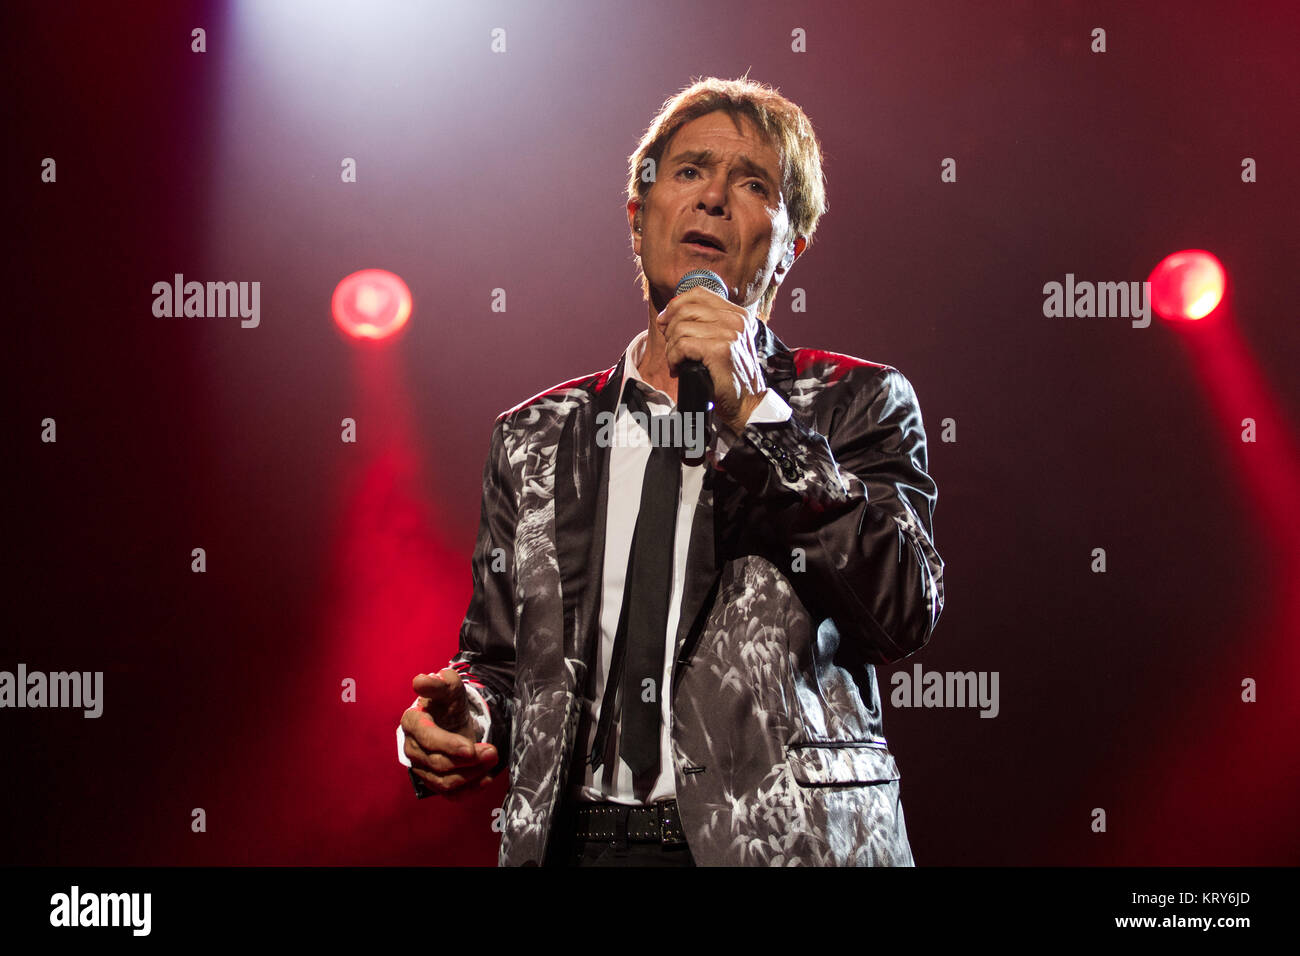 The British singer, songer and musician Sir Cliff Richard performs a live concert at Oslo Spektrum. Norway, 27/05 2014. Stock Photo